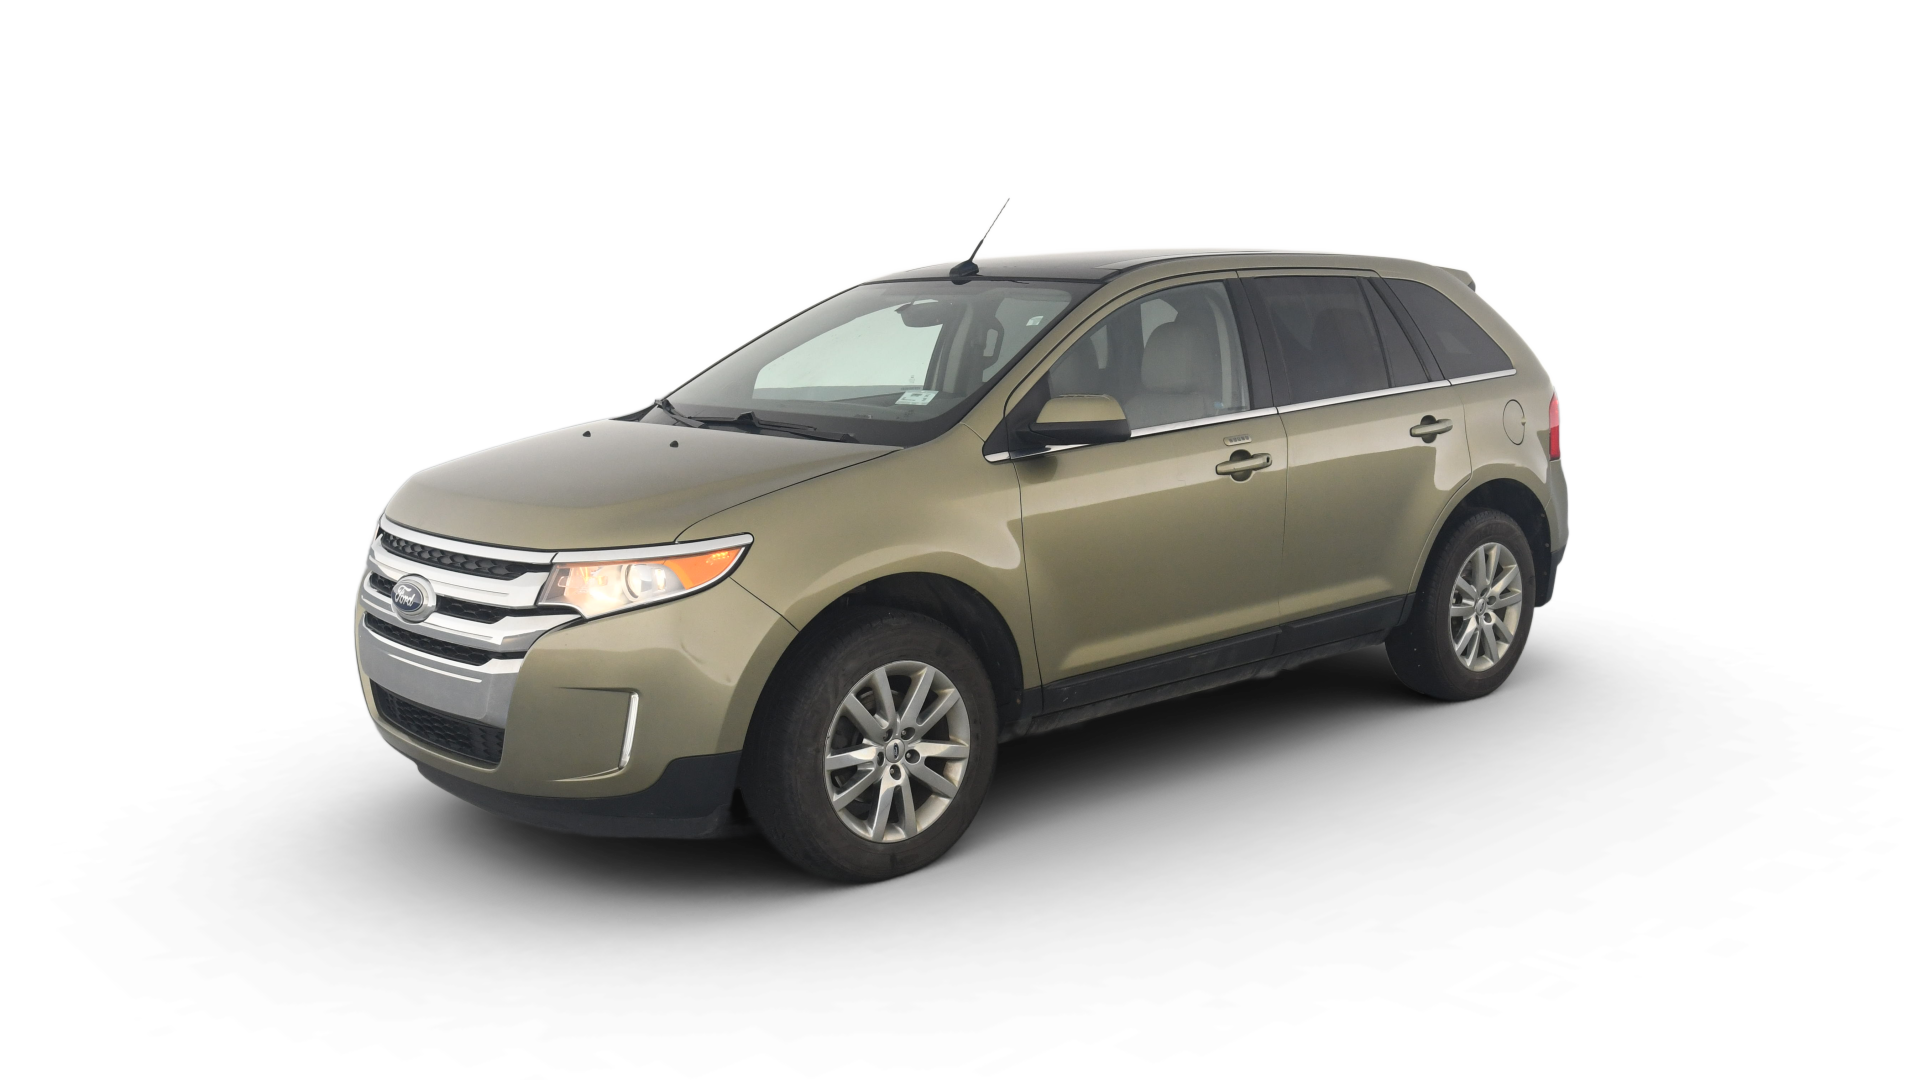 Used 2013 Ford Edge for sale in Bloomsburg, PA | Carvana